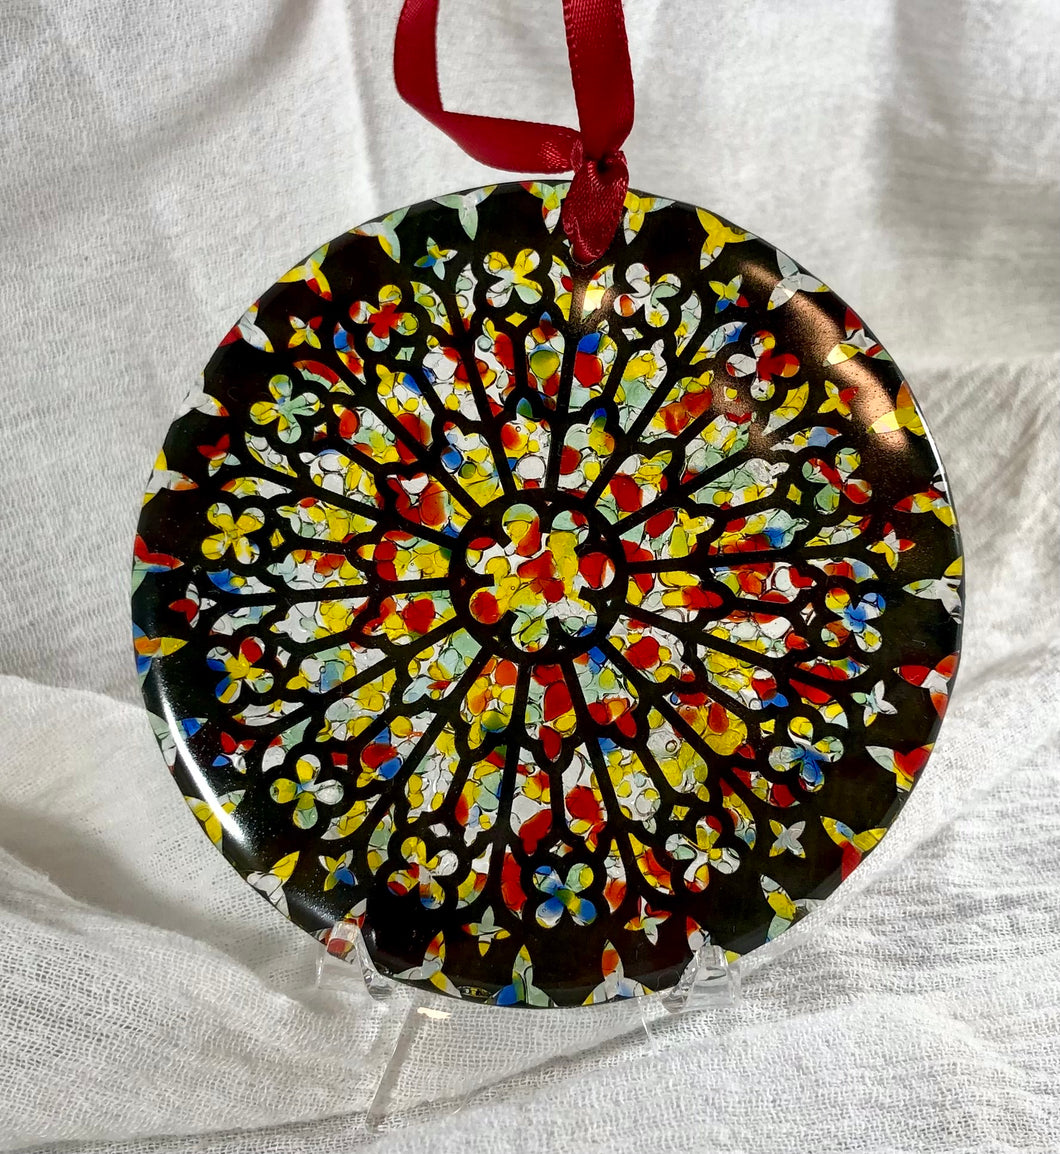 Stained Glass Ornament